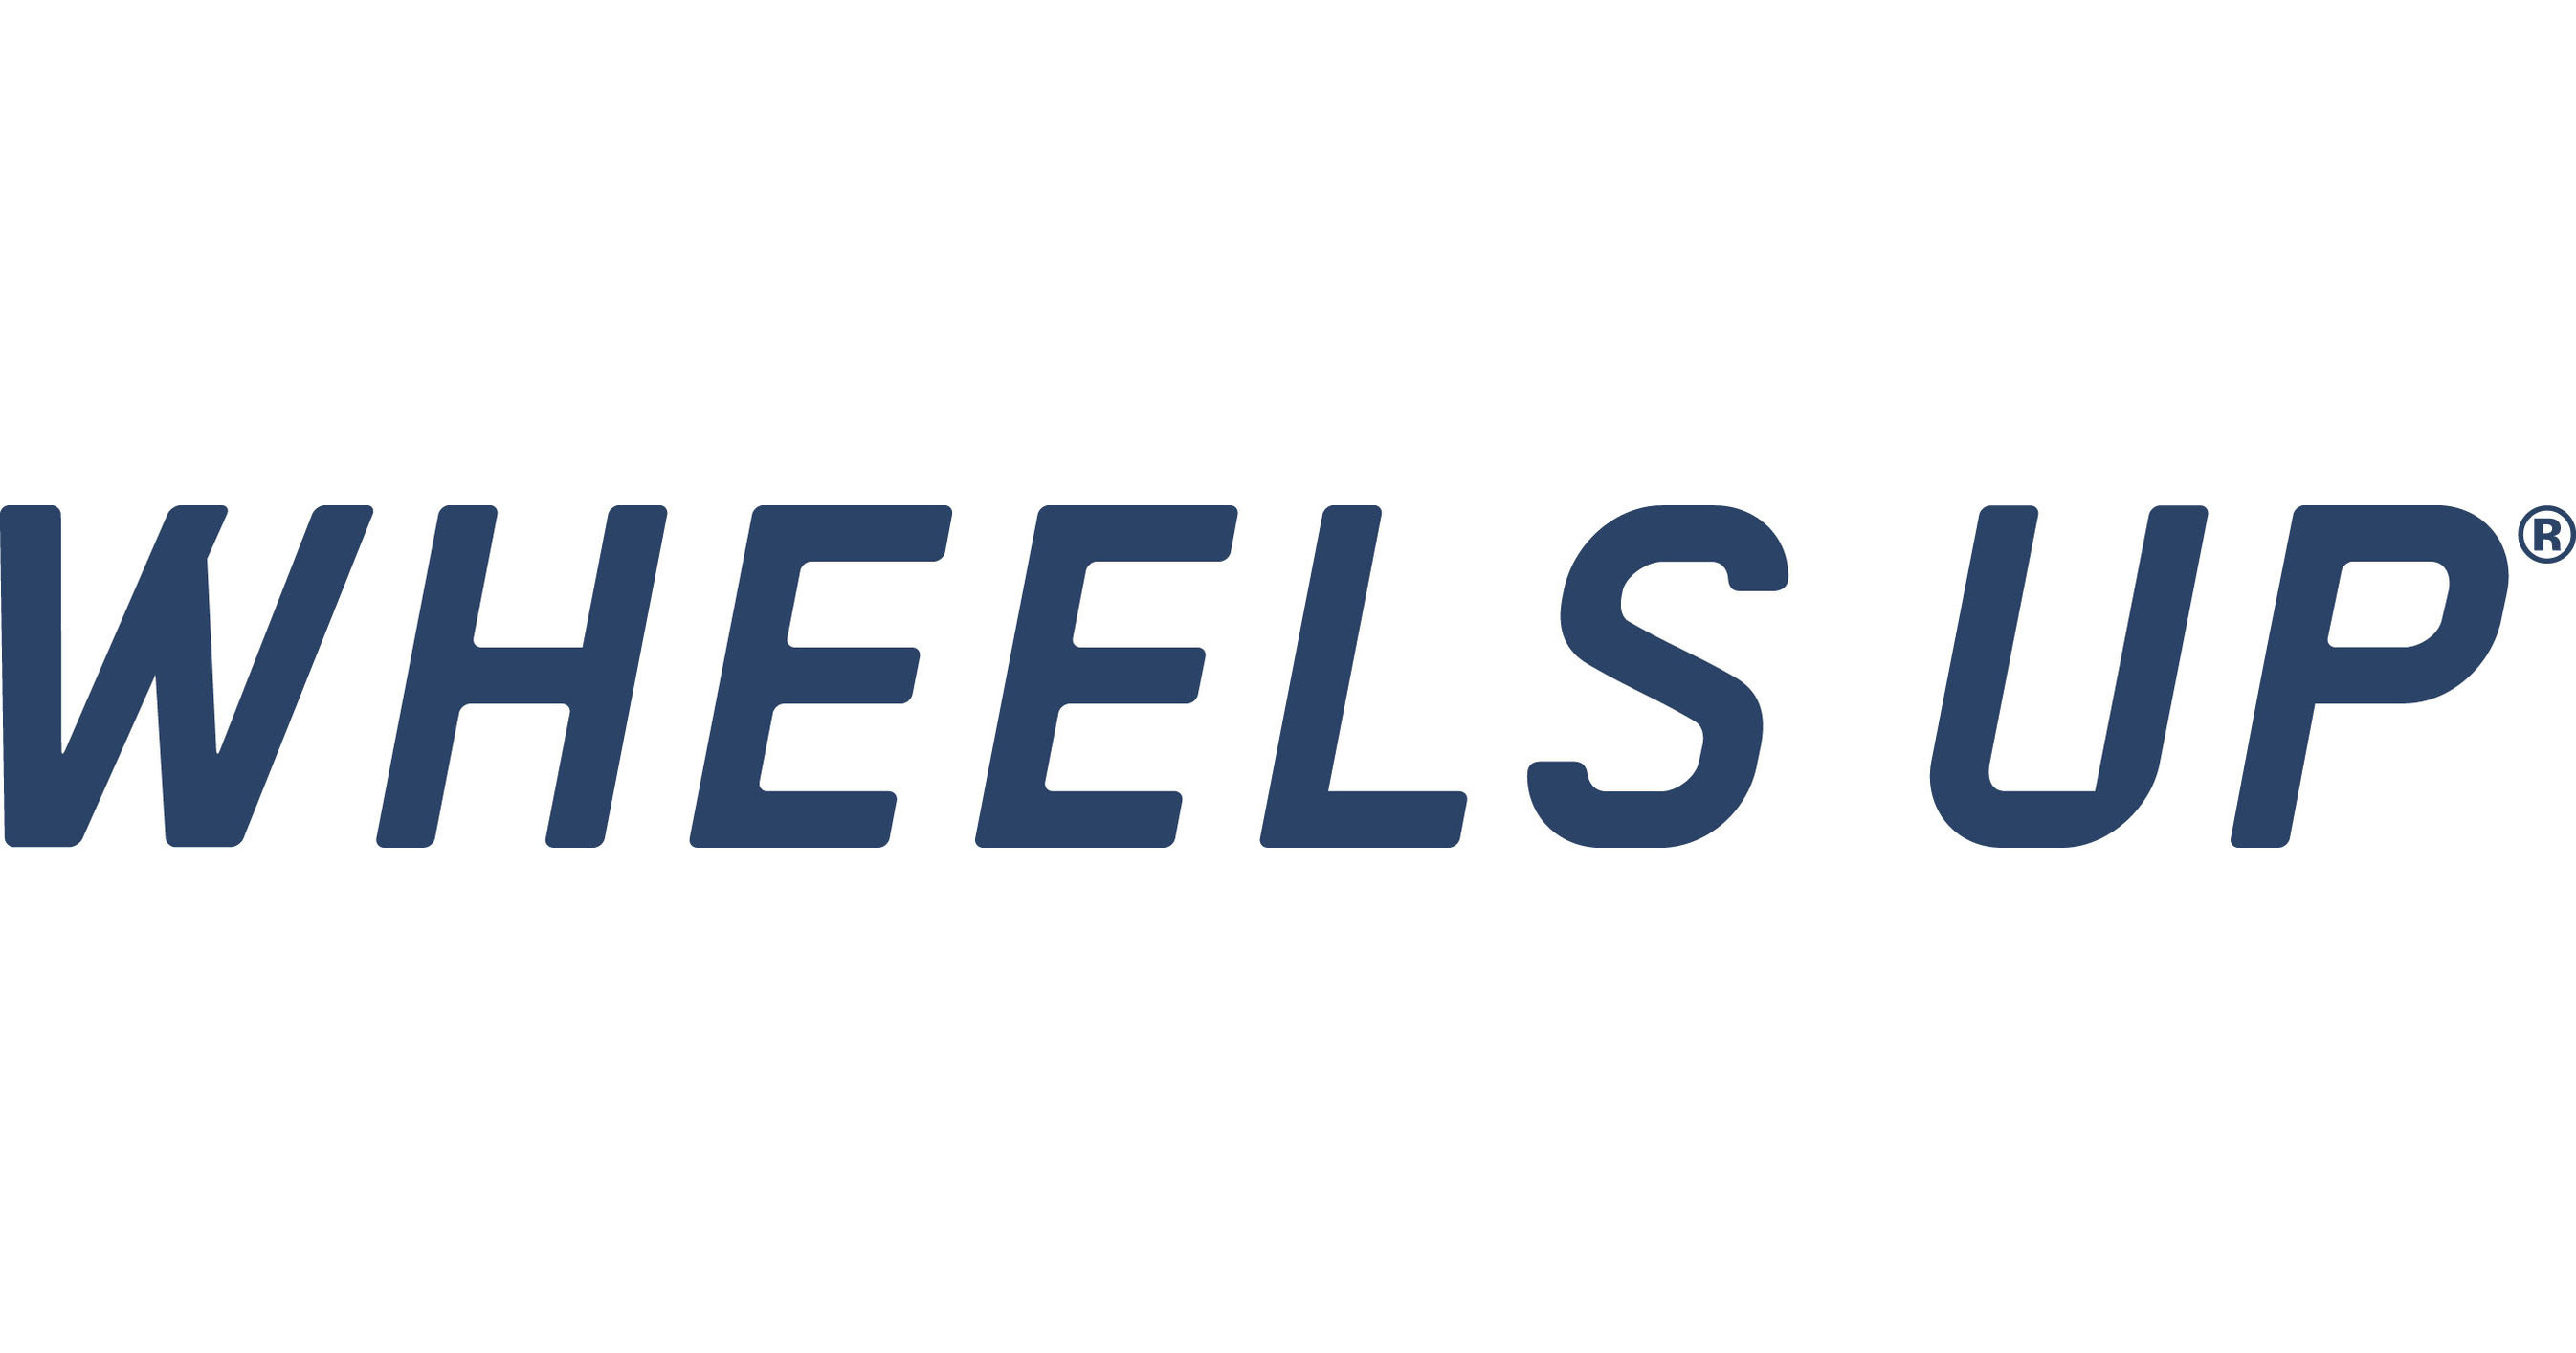 Wheels Up Raises $128 Million to Accelerate Growth and Digital